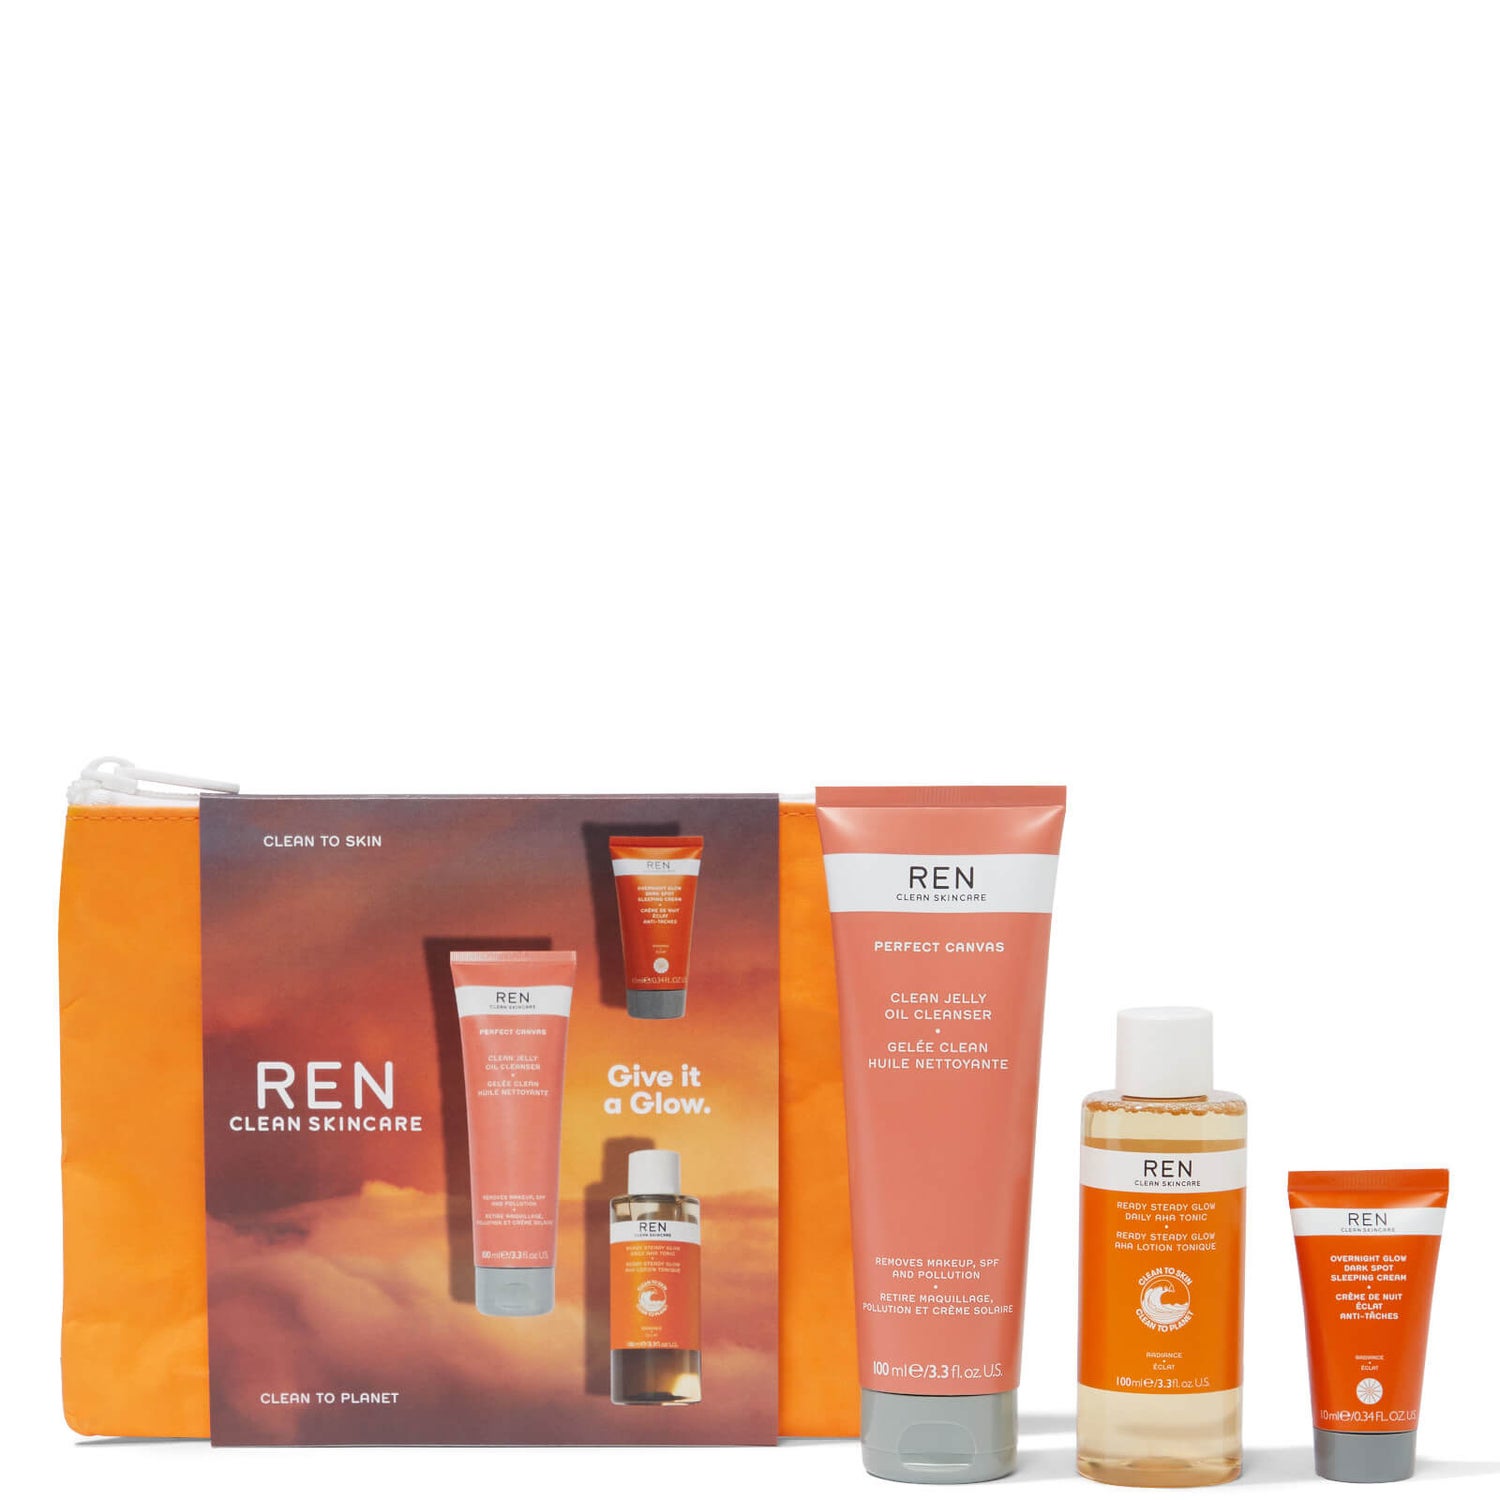 REN Clean Skincare Give It a Glow Set (Worth £50.00)